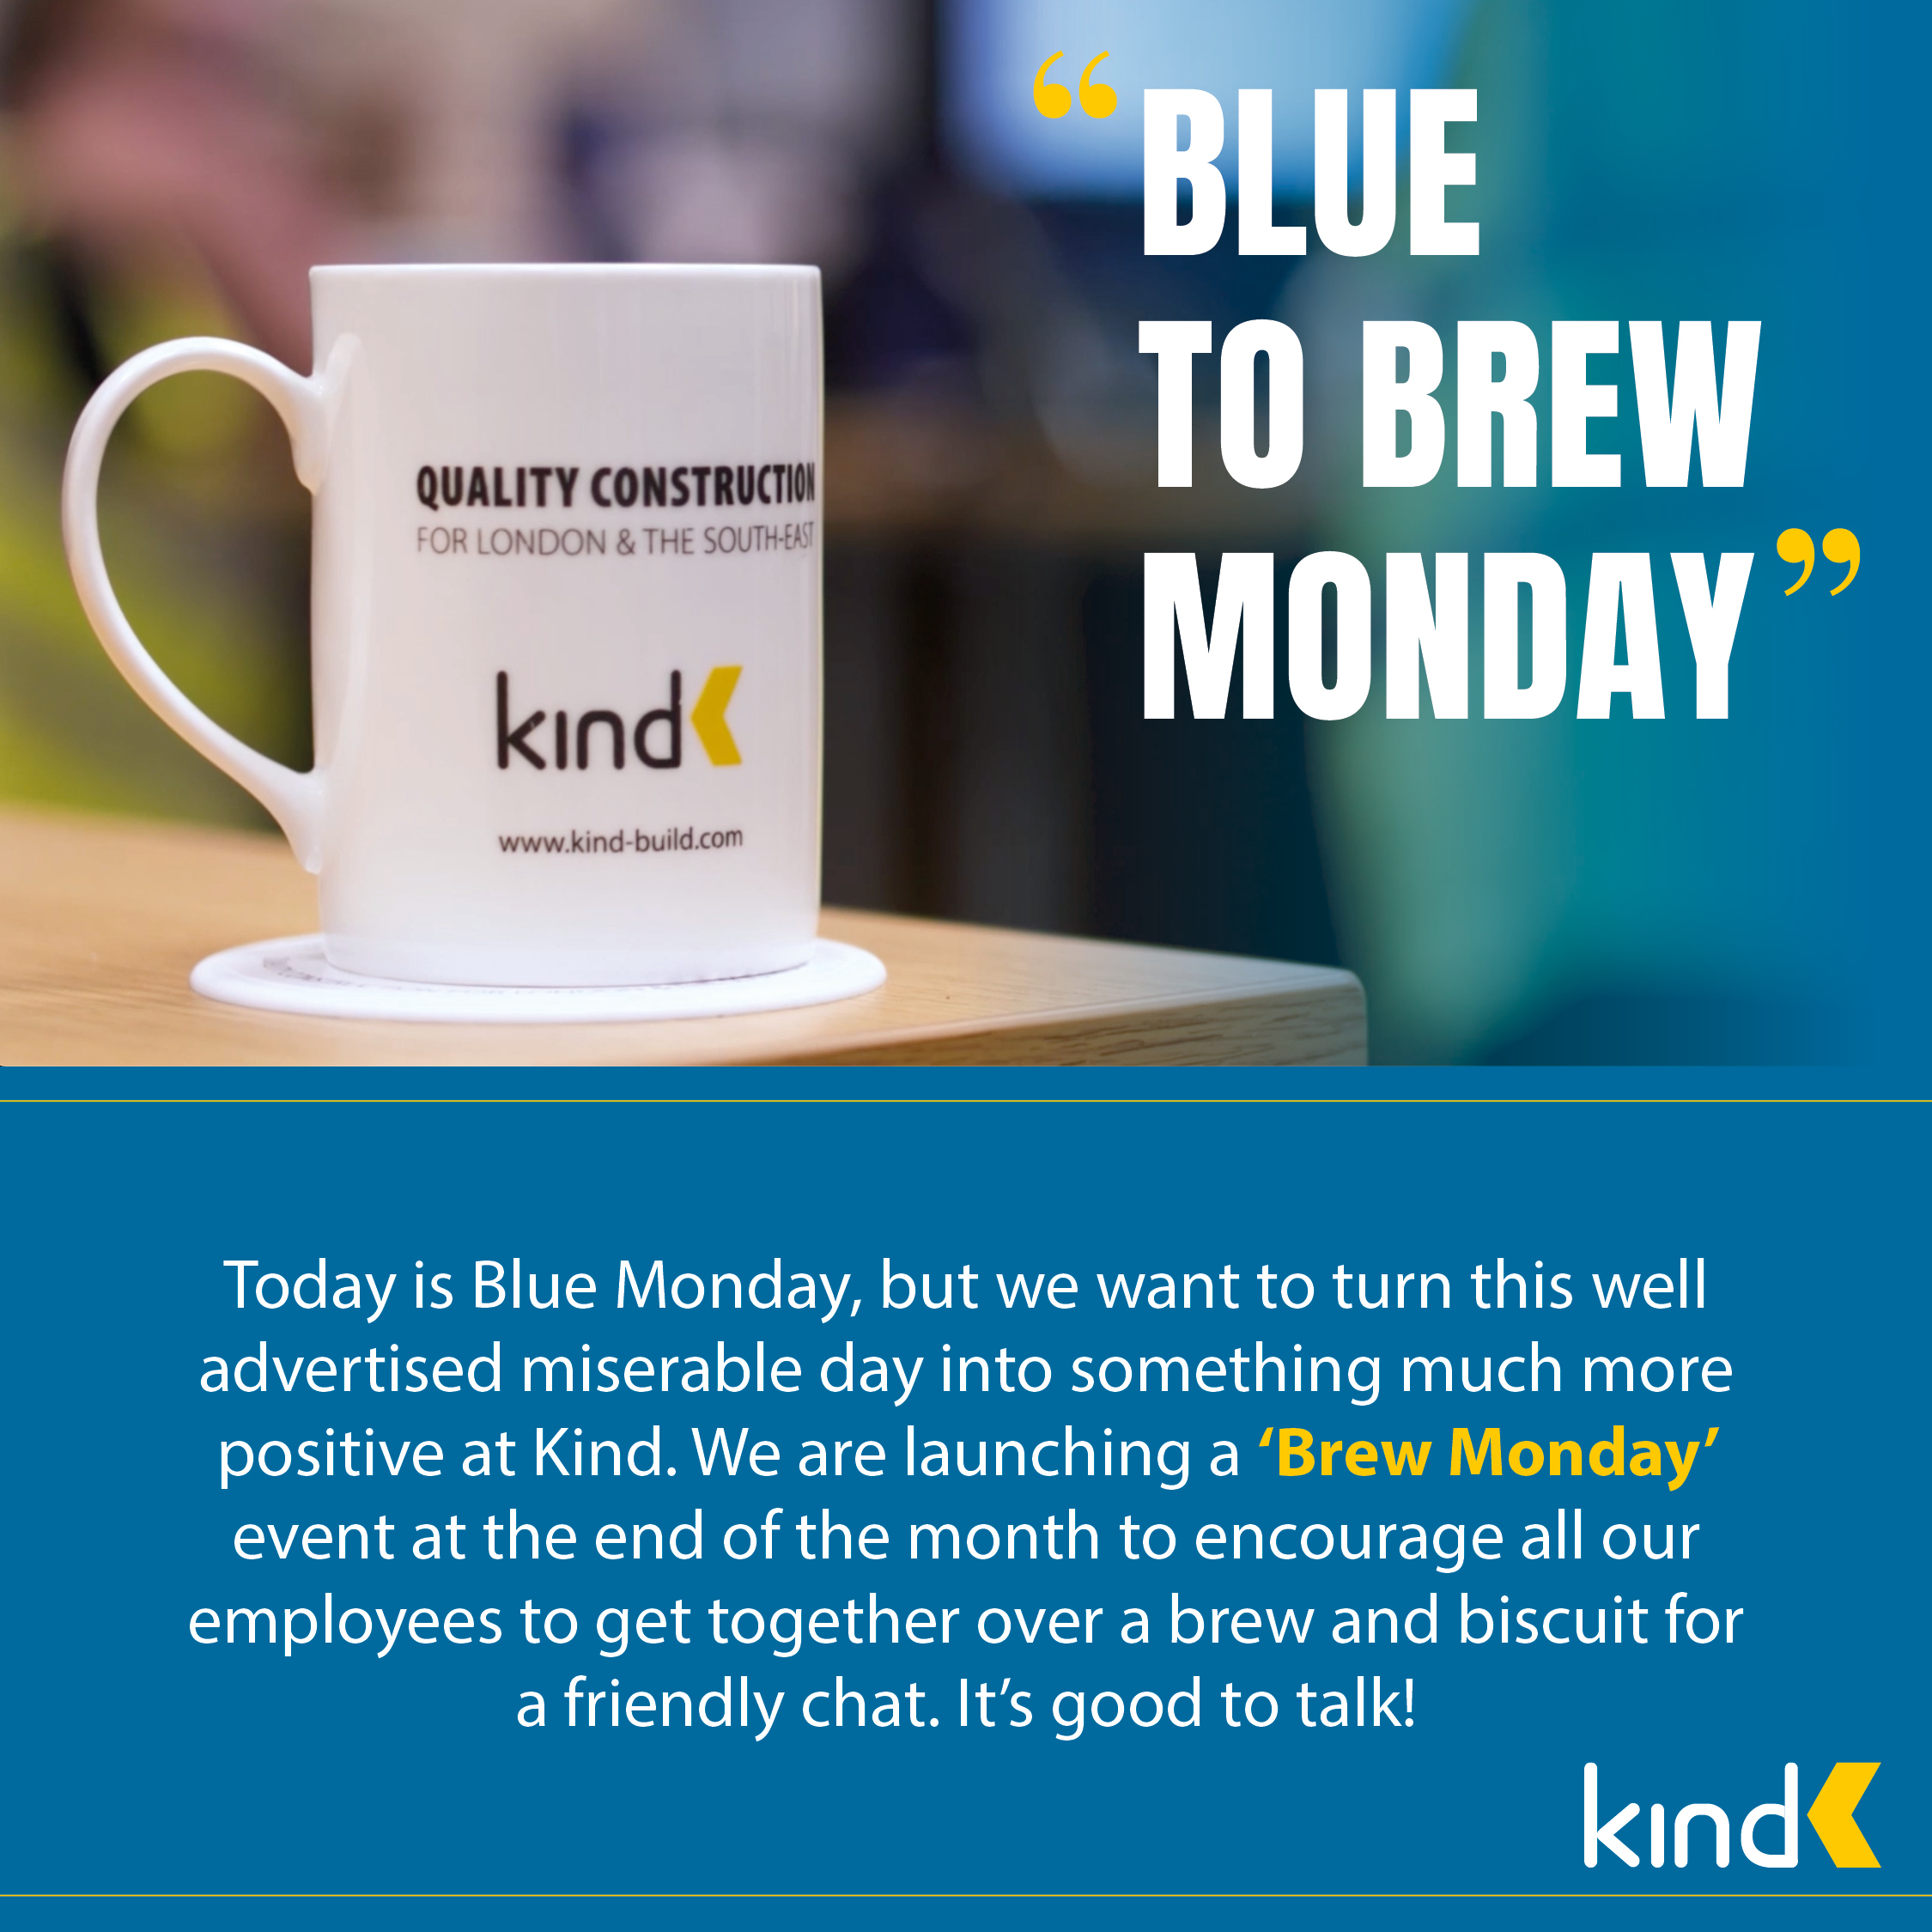 Blue To Brew Monday image